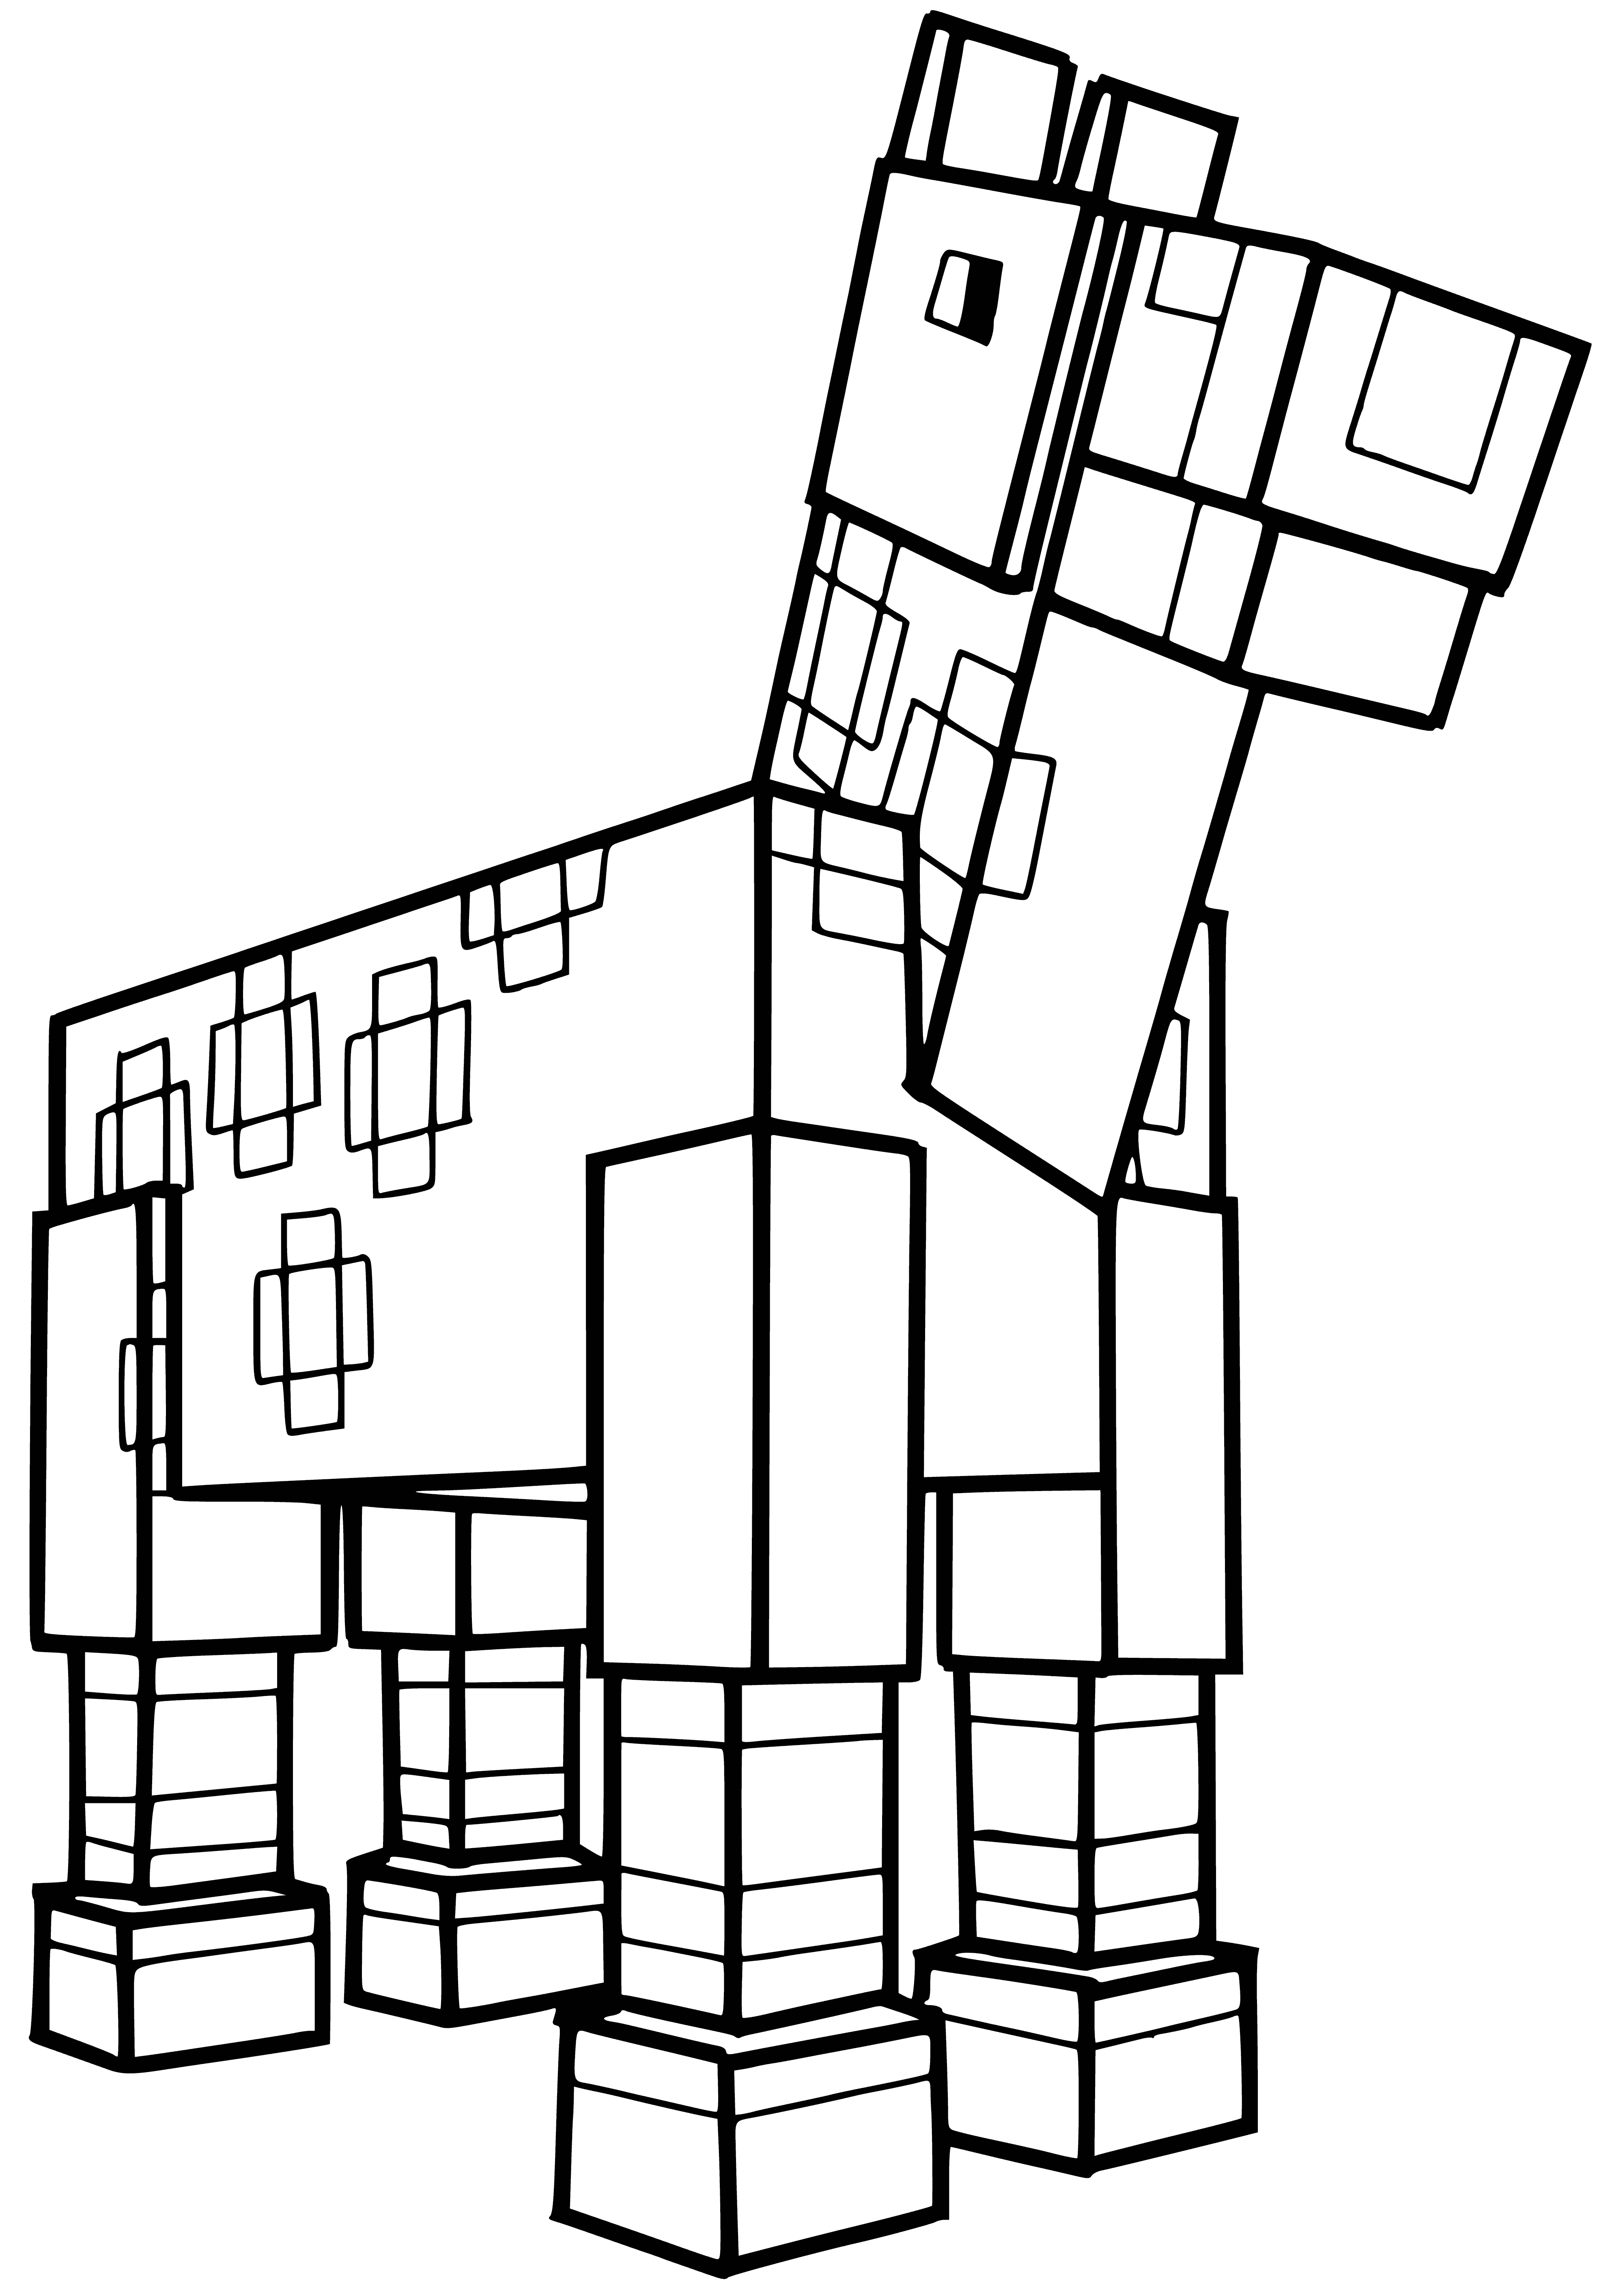 Horse in Minecraft coloring page